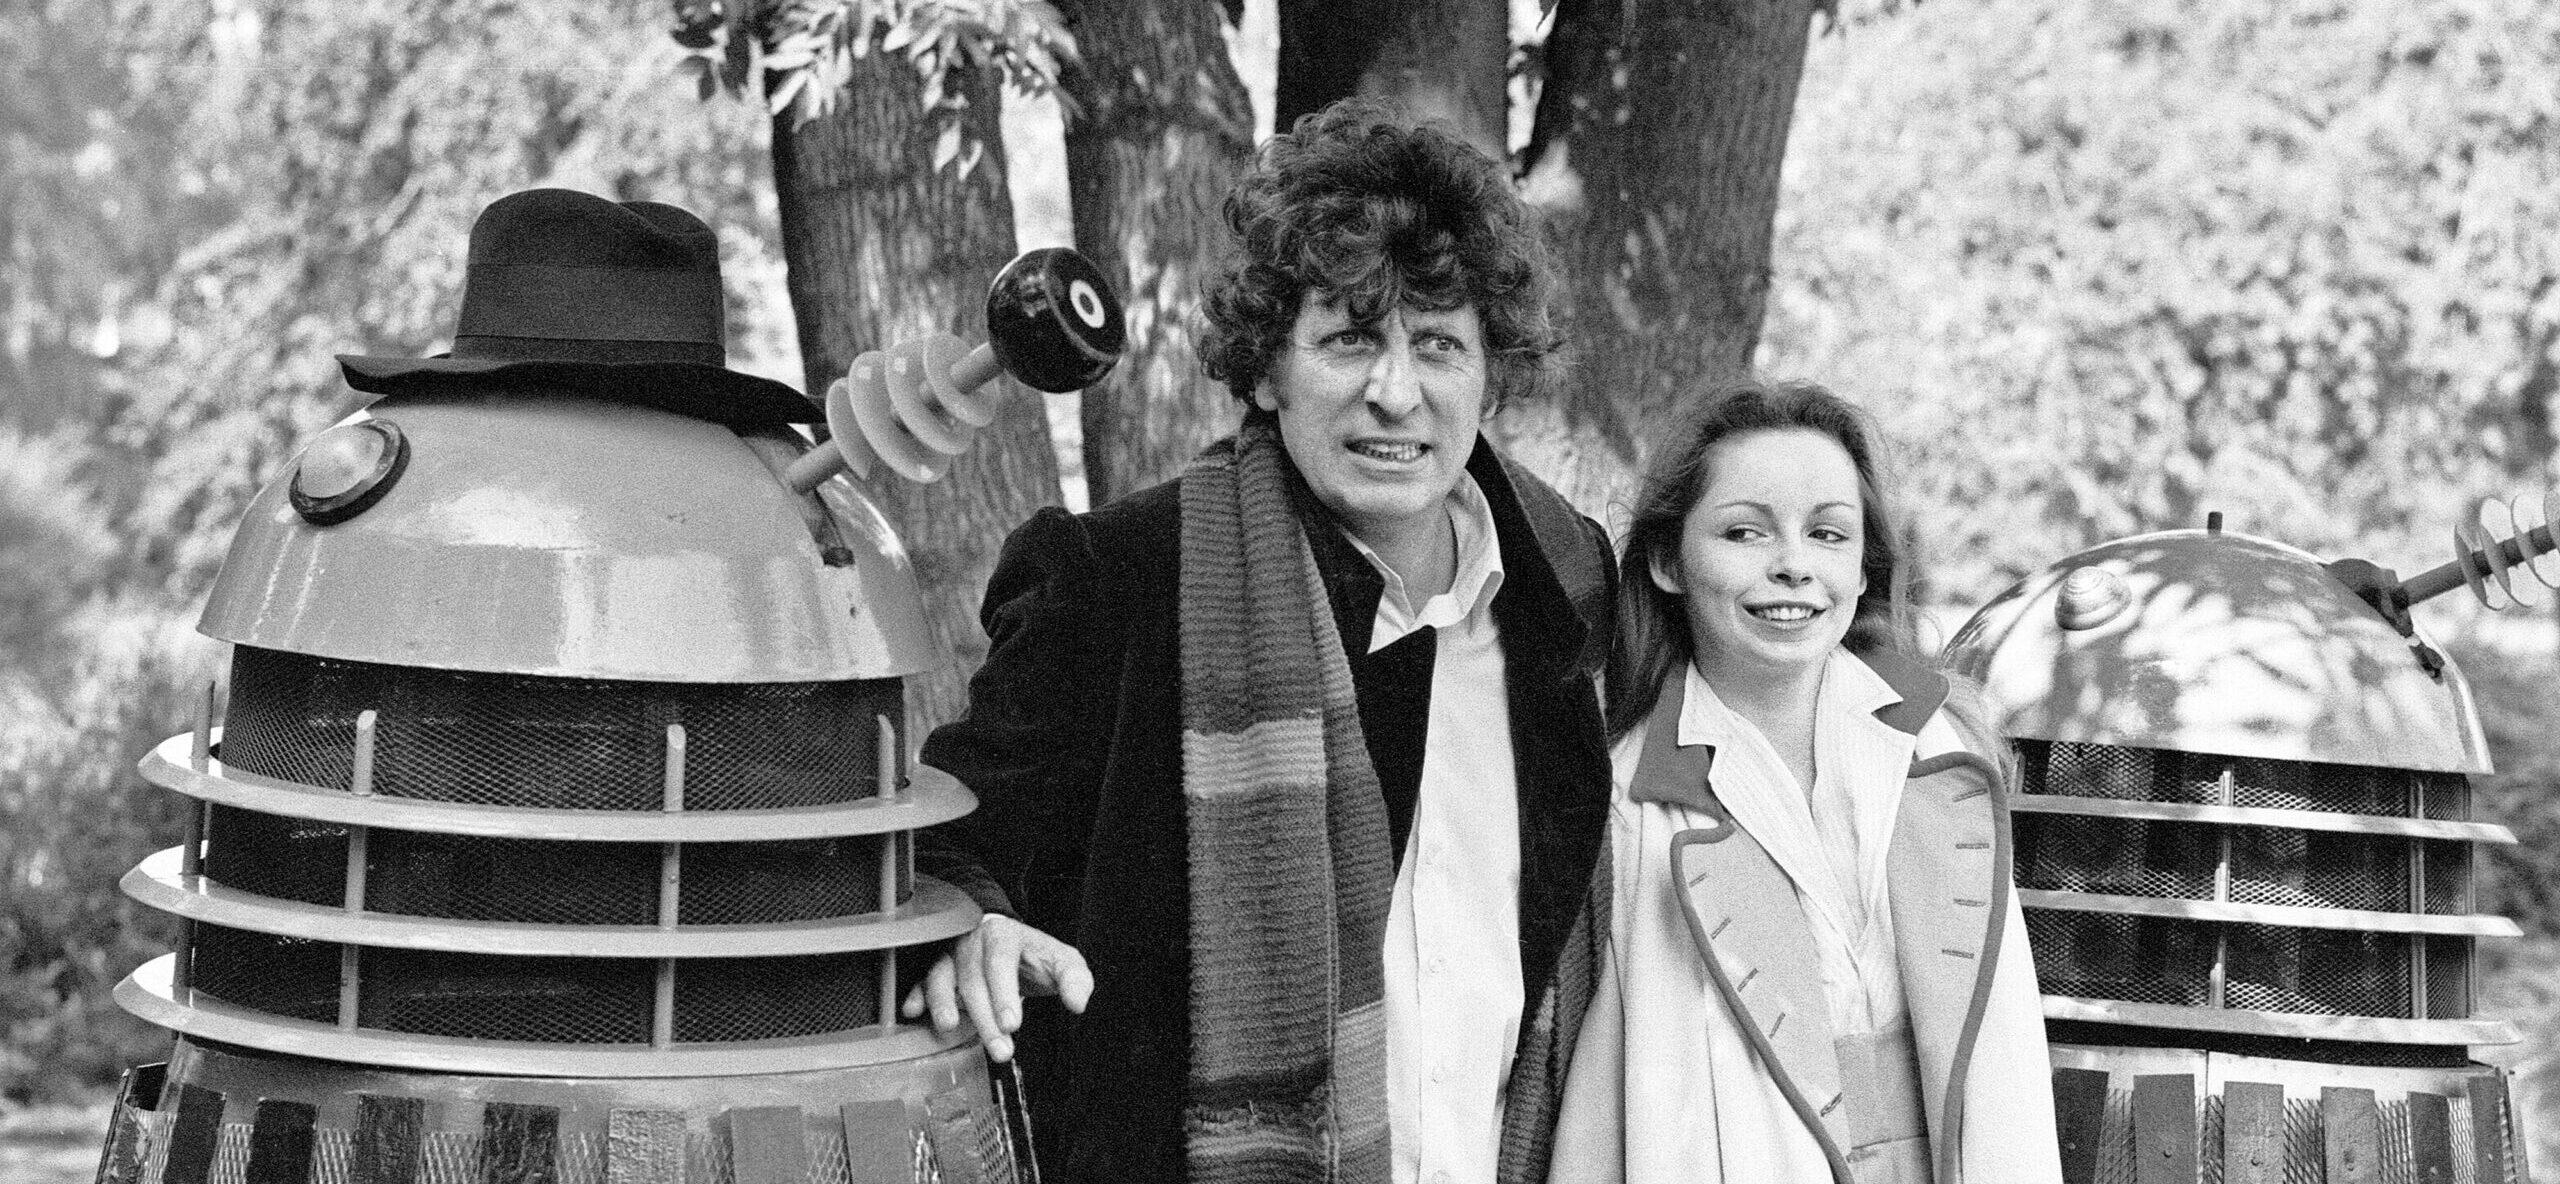 Tom Baker poses as the Fourth Doctor in Doctor Who next to a Dalek and Sarah Baker